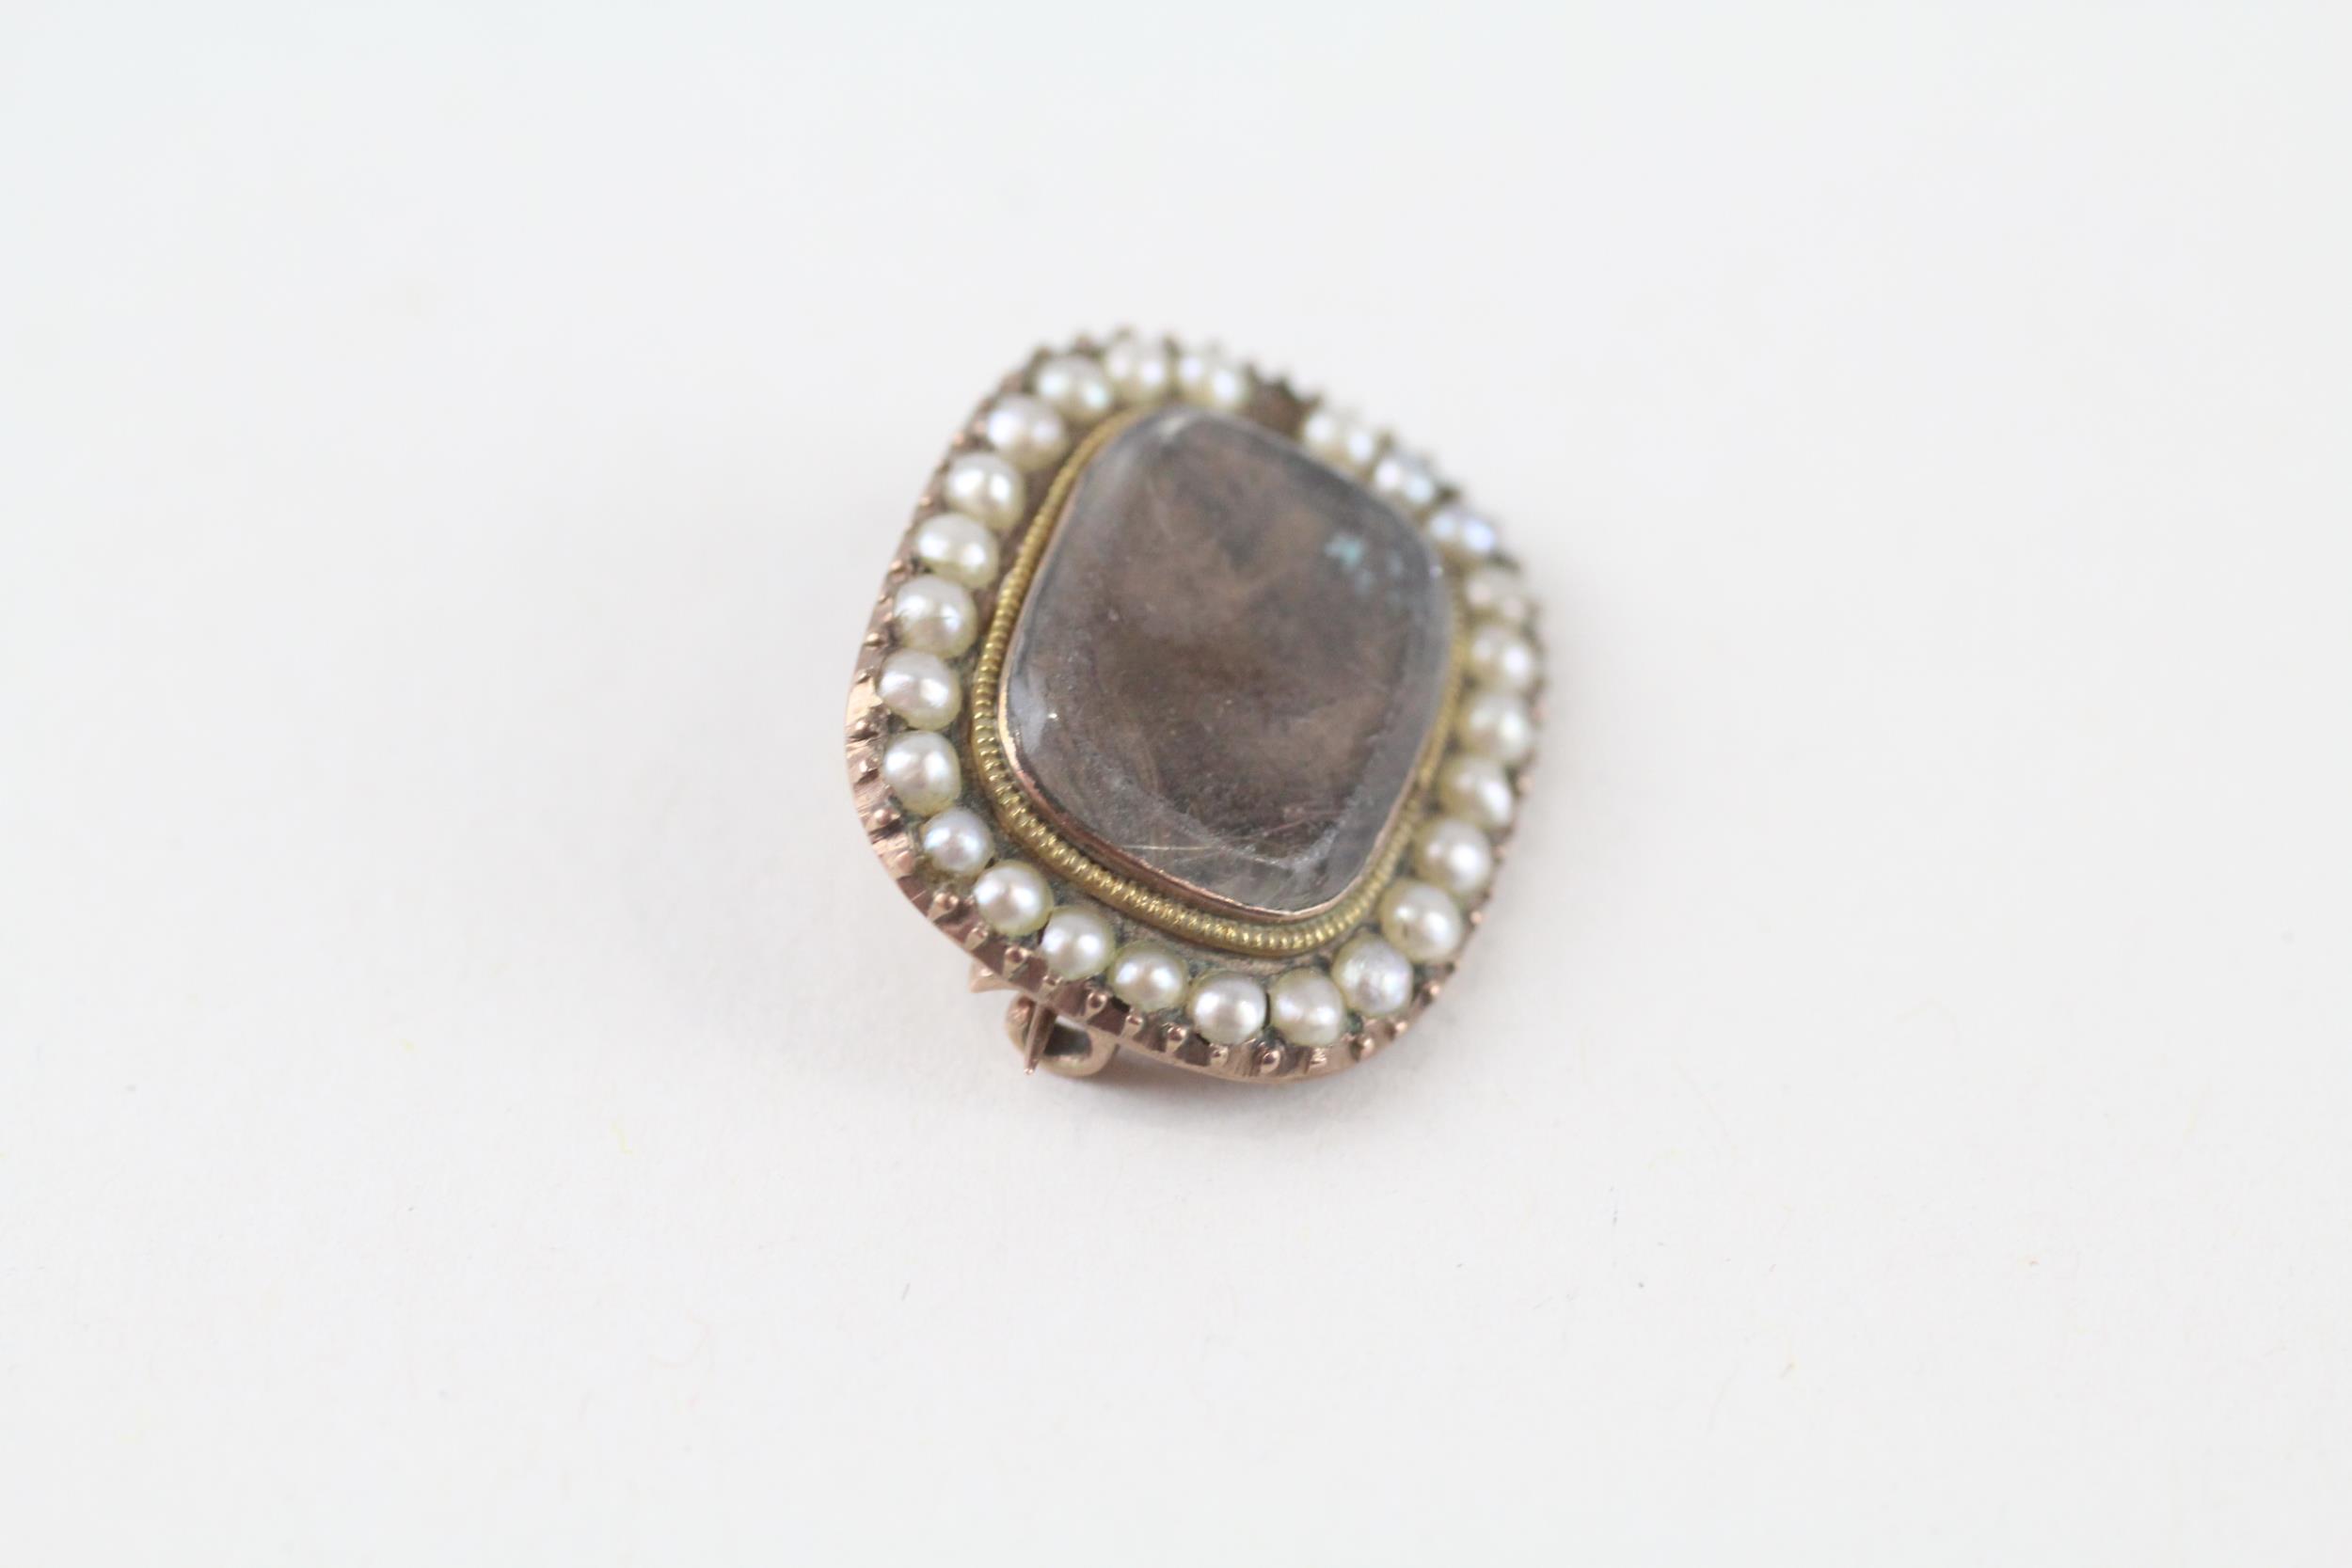 9ct gold antique seed pearl & hairwork mourning brooch with engraved initials, as seen (2.4g) - Image 2 of 4